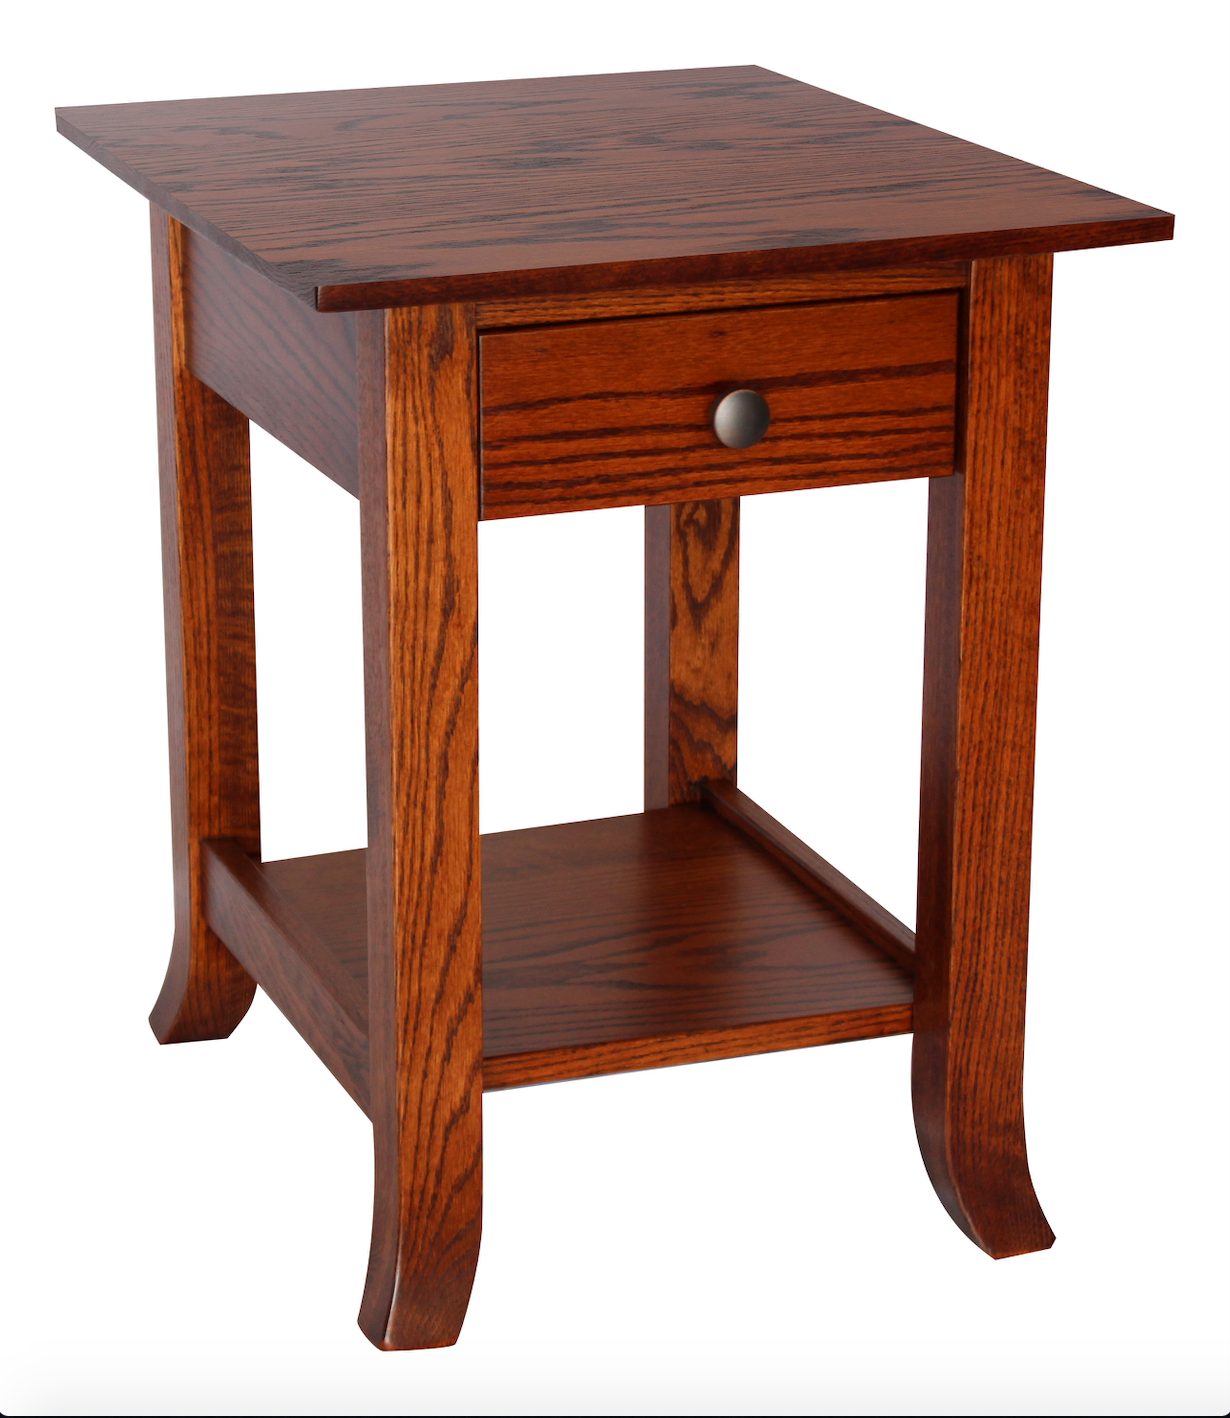 Carlisle Shaker 18" x 22" End Table With Drawer